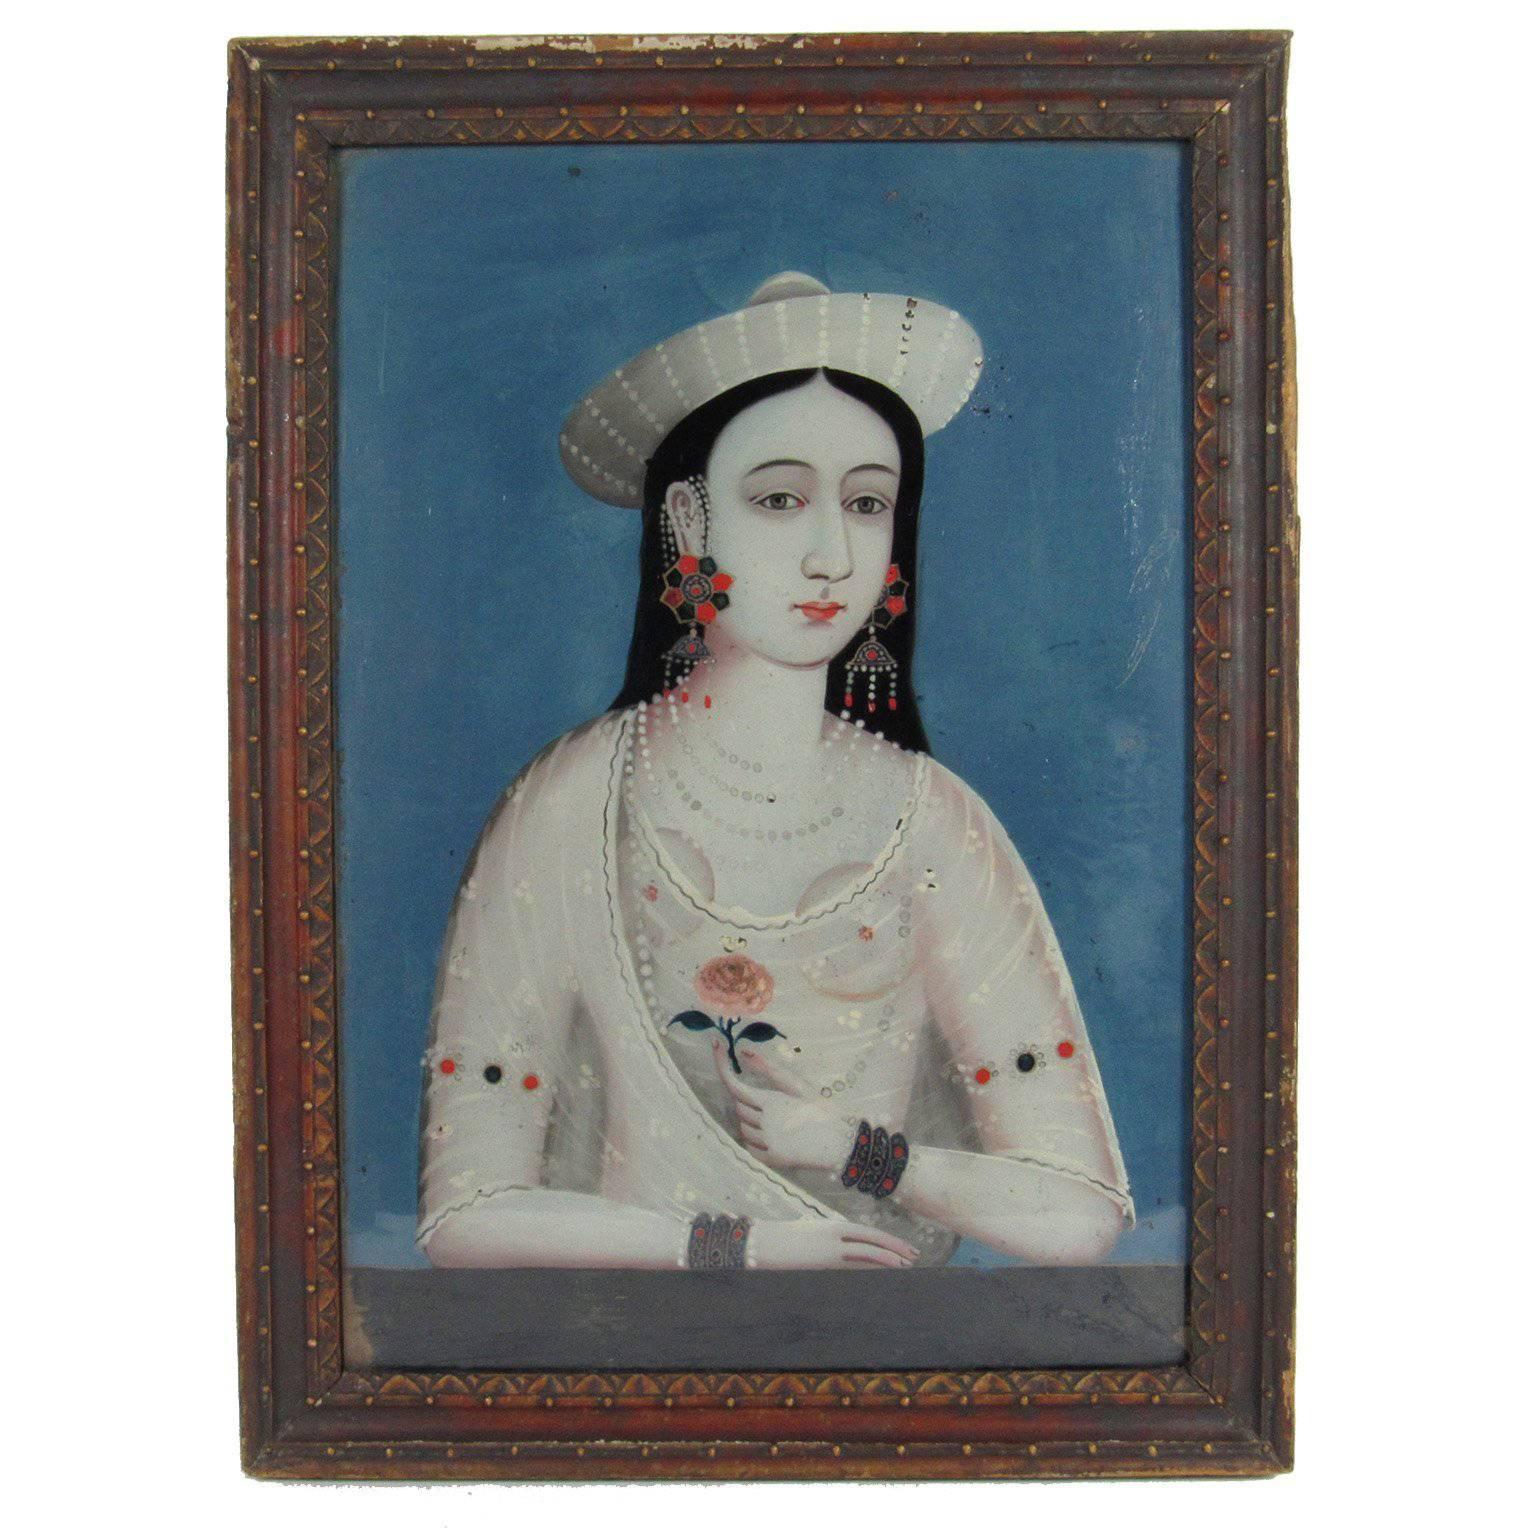 China Trade Reverse Painting on Glass Portrait of a Young Woman with Pink Flower